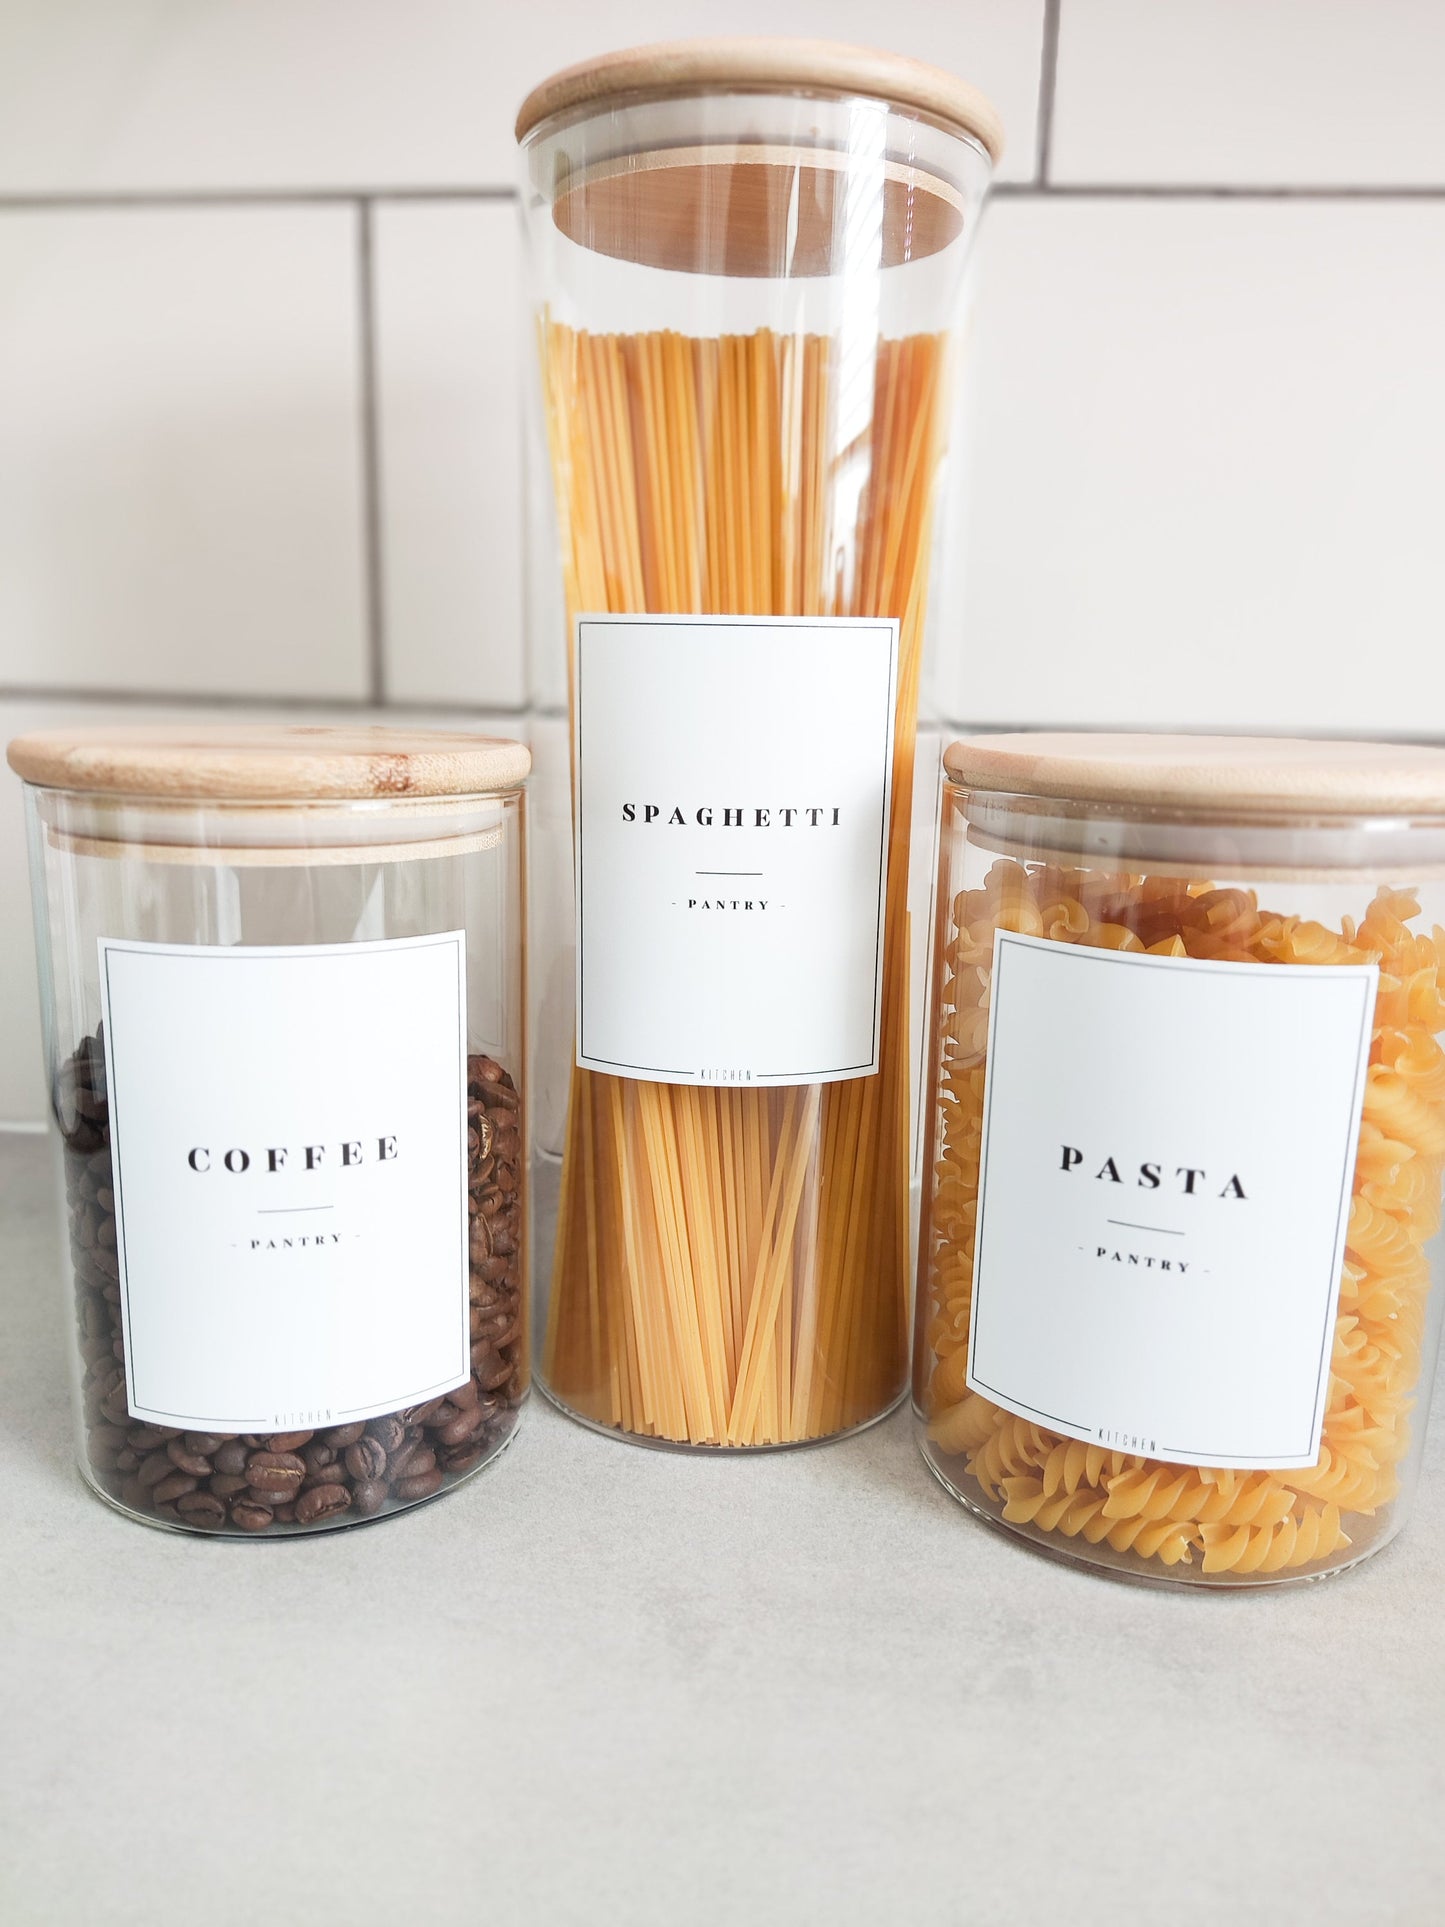 Pantry Labels Stickers For Kitchen Organisation Jars Storage For Tea Coffee Sugar Pasta Rice Spaghetti Flour Waterproof Stickers Home